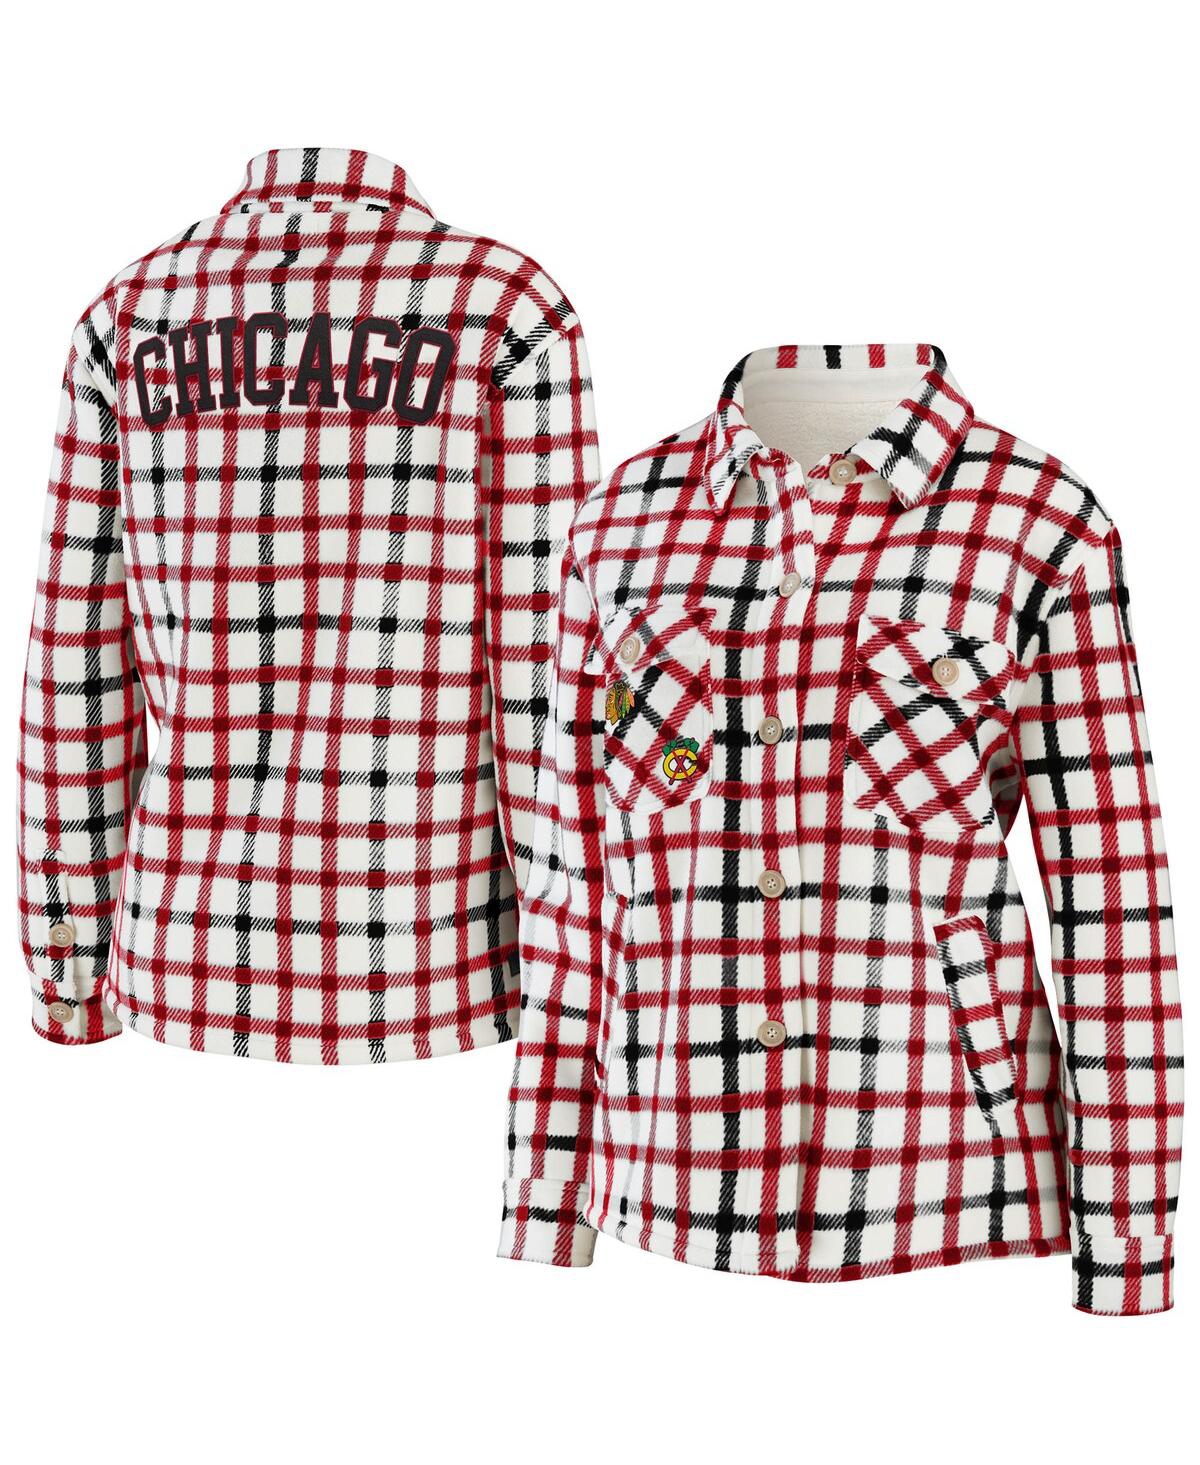 Women's Wear by Erin Andrews Oatmeal Chicago Blackhawks Plaid Button-Up Shirt Jacket - Oatmeal